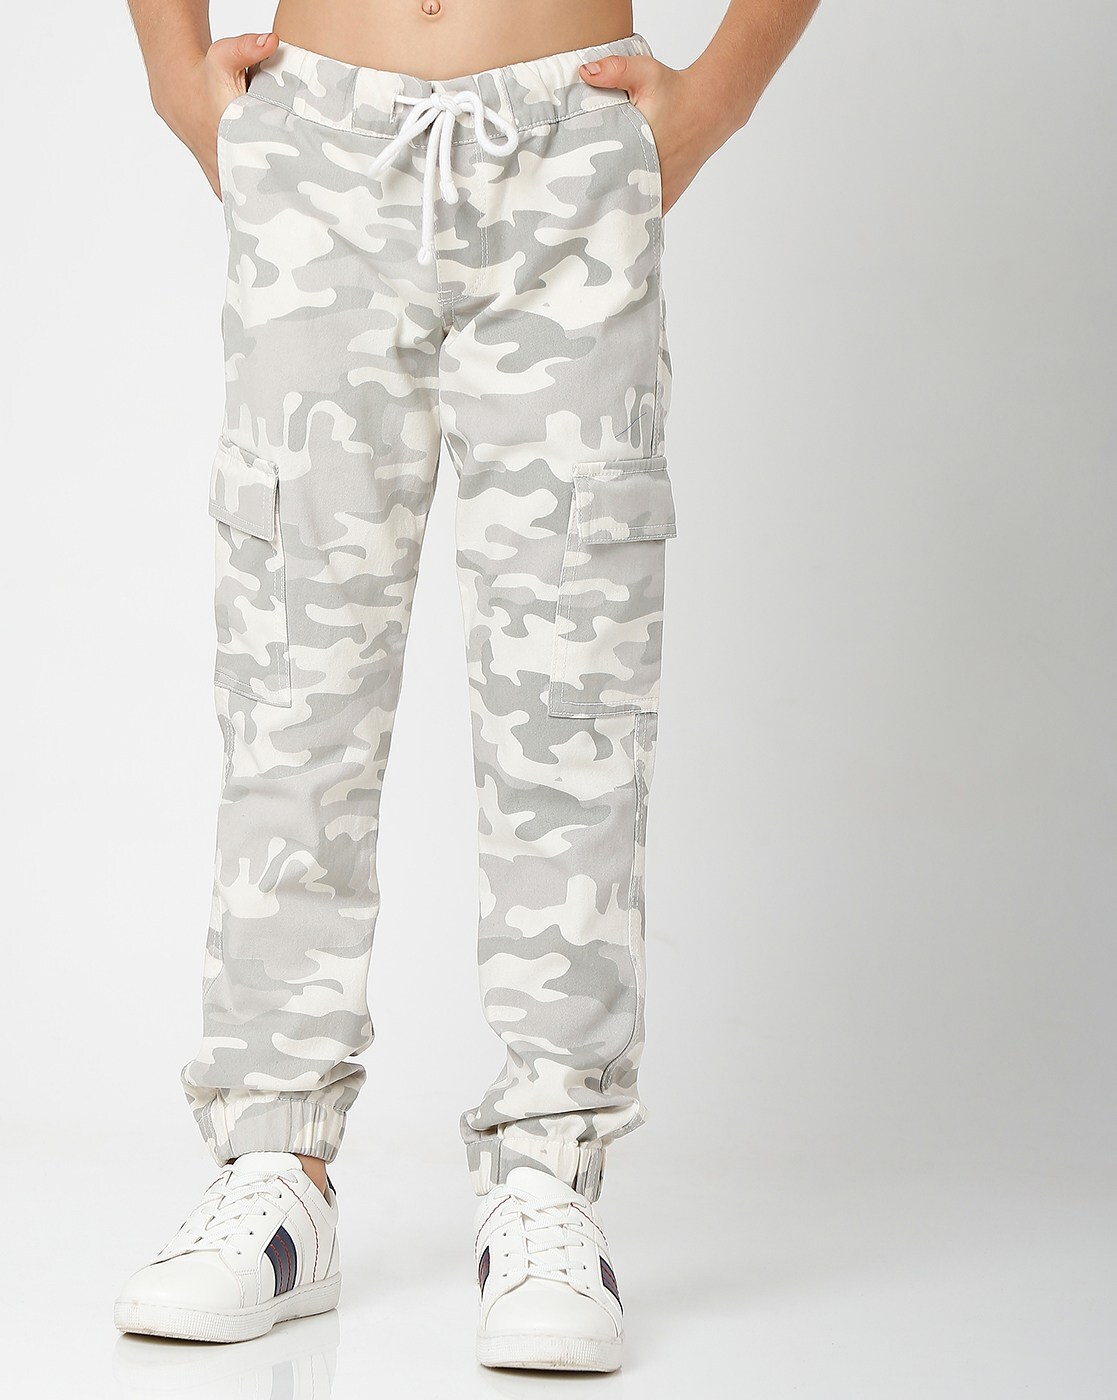 Men's Cotton Camouflage Track Pant. | GREEN-YELLOW | size from M to 5XL. –  Neo Garments